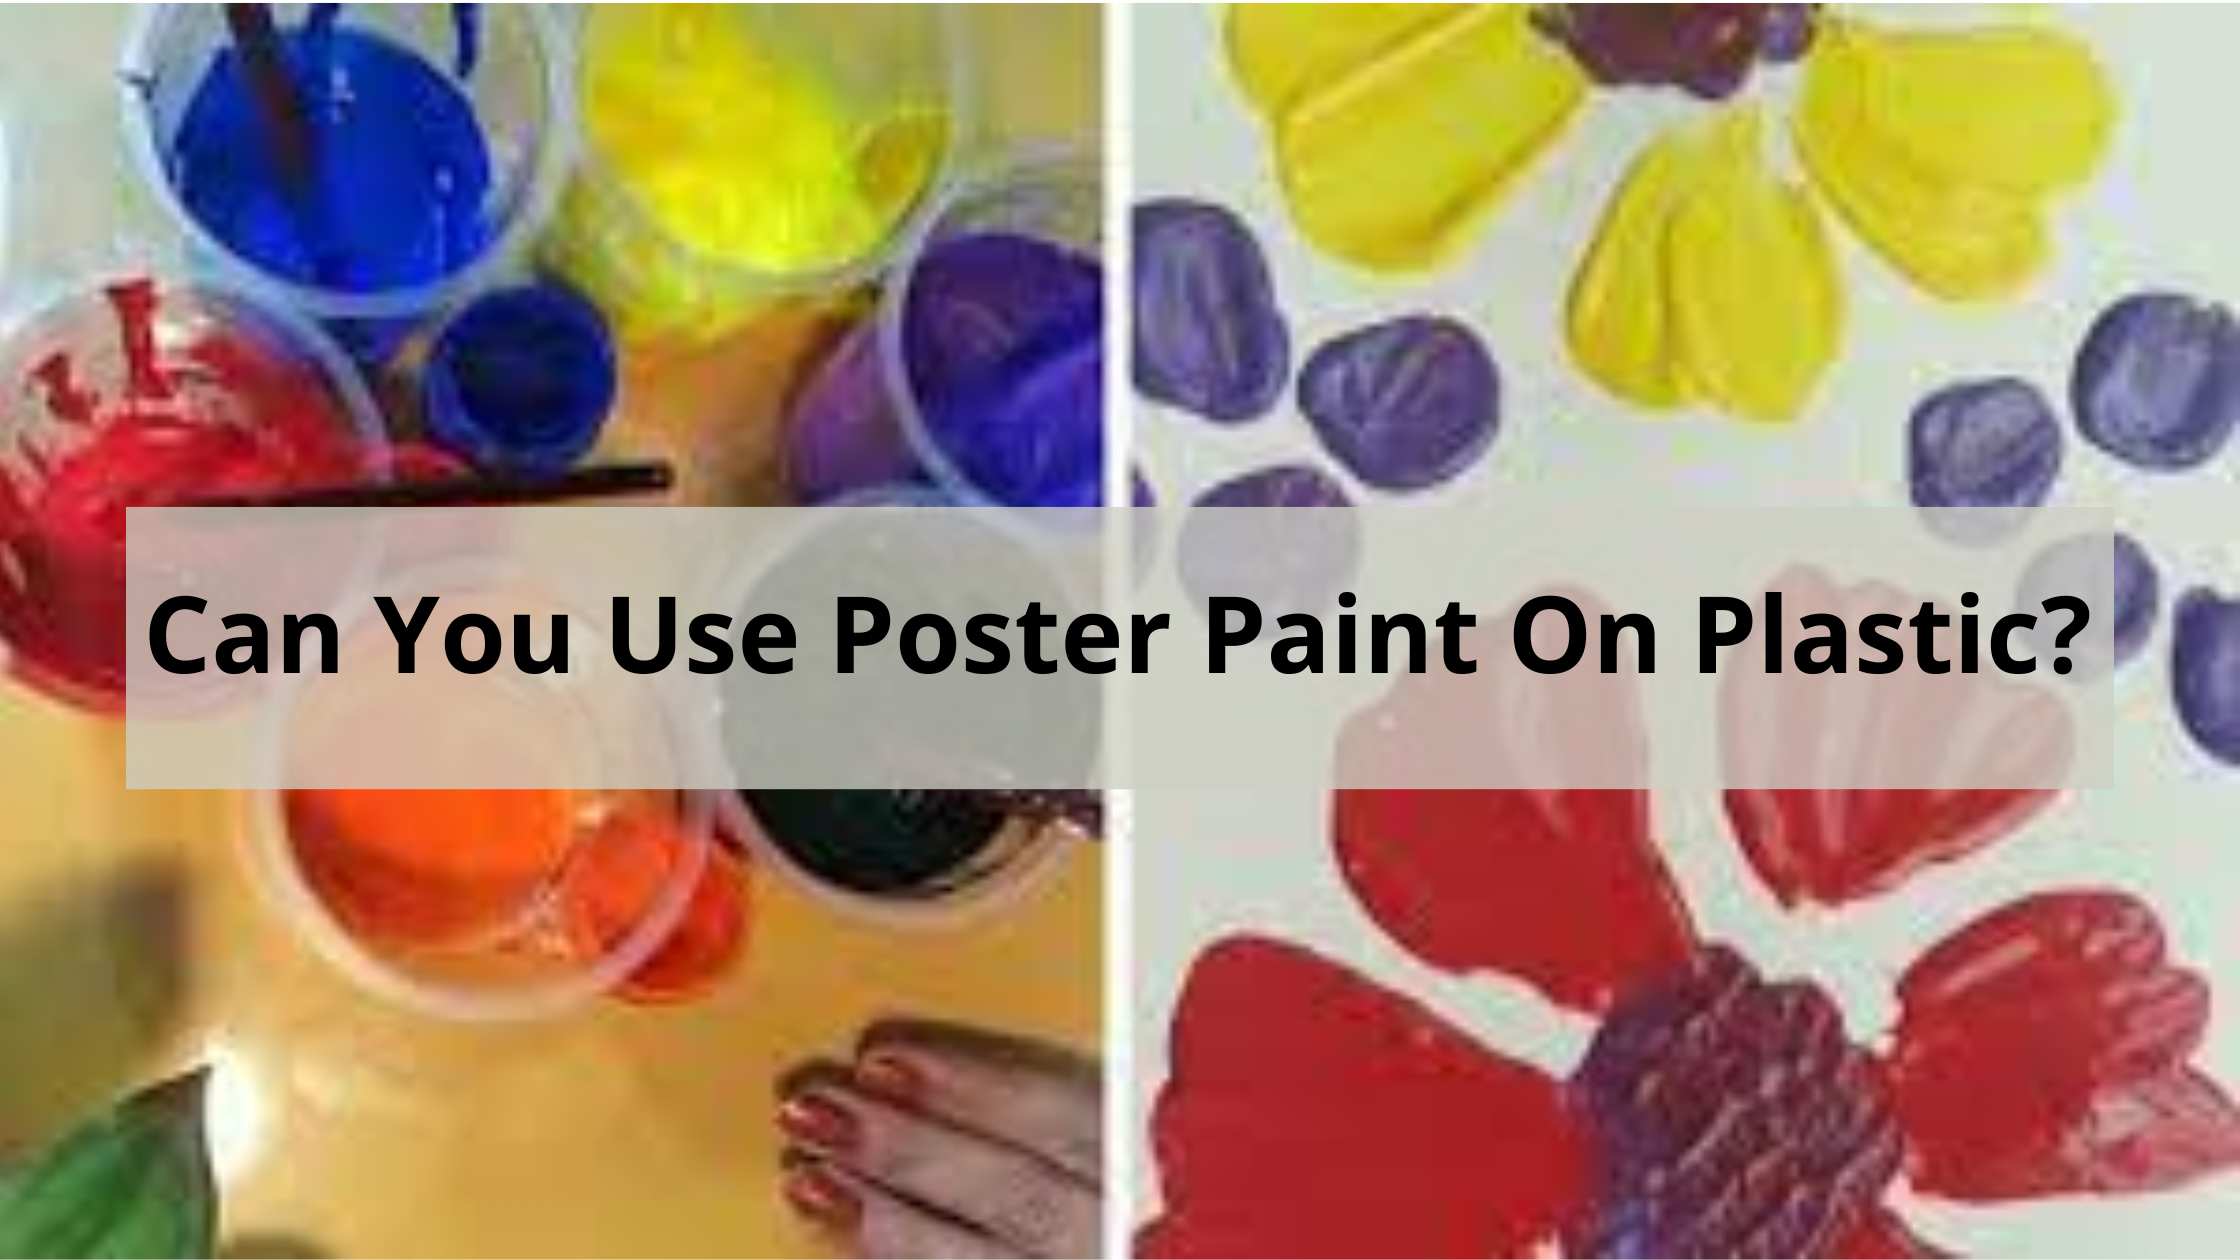 Can You Use Poster Paint On Plastic?